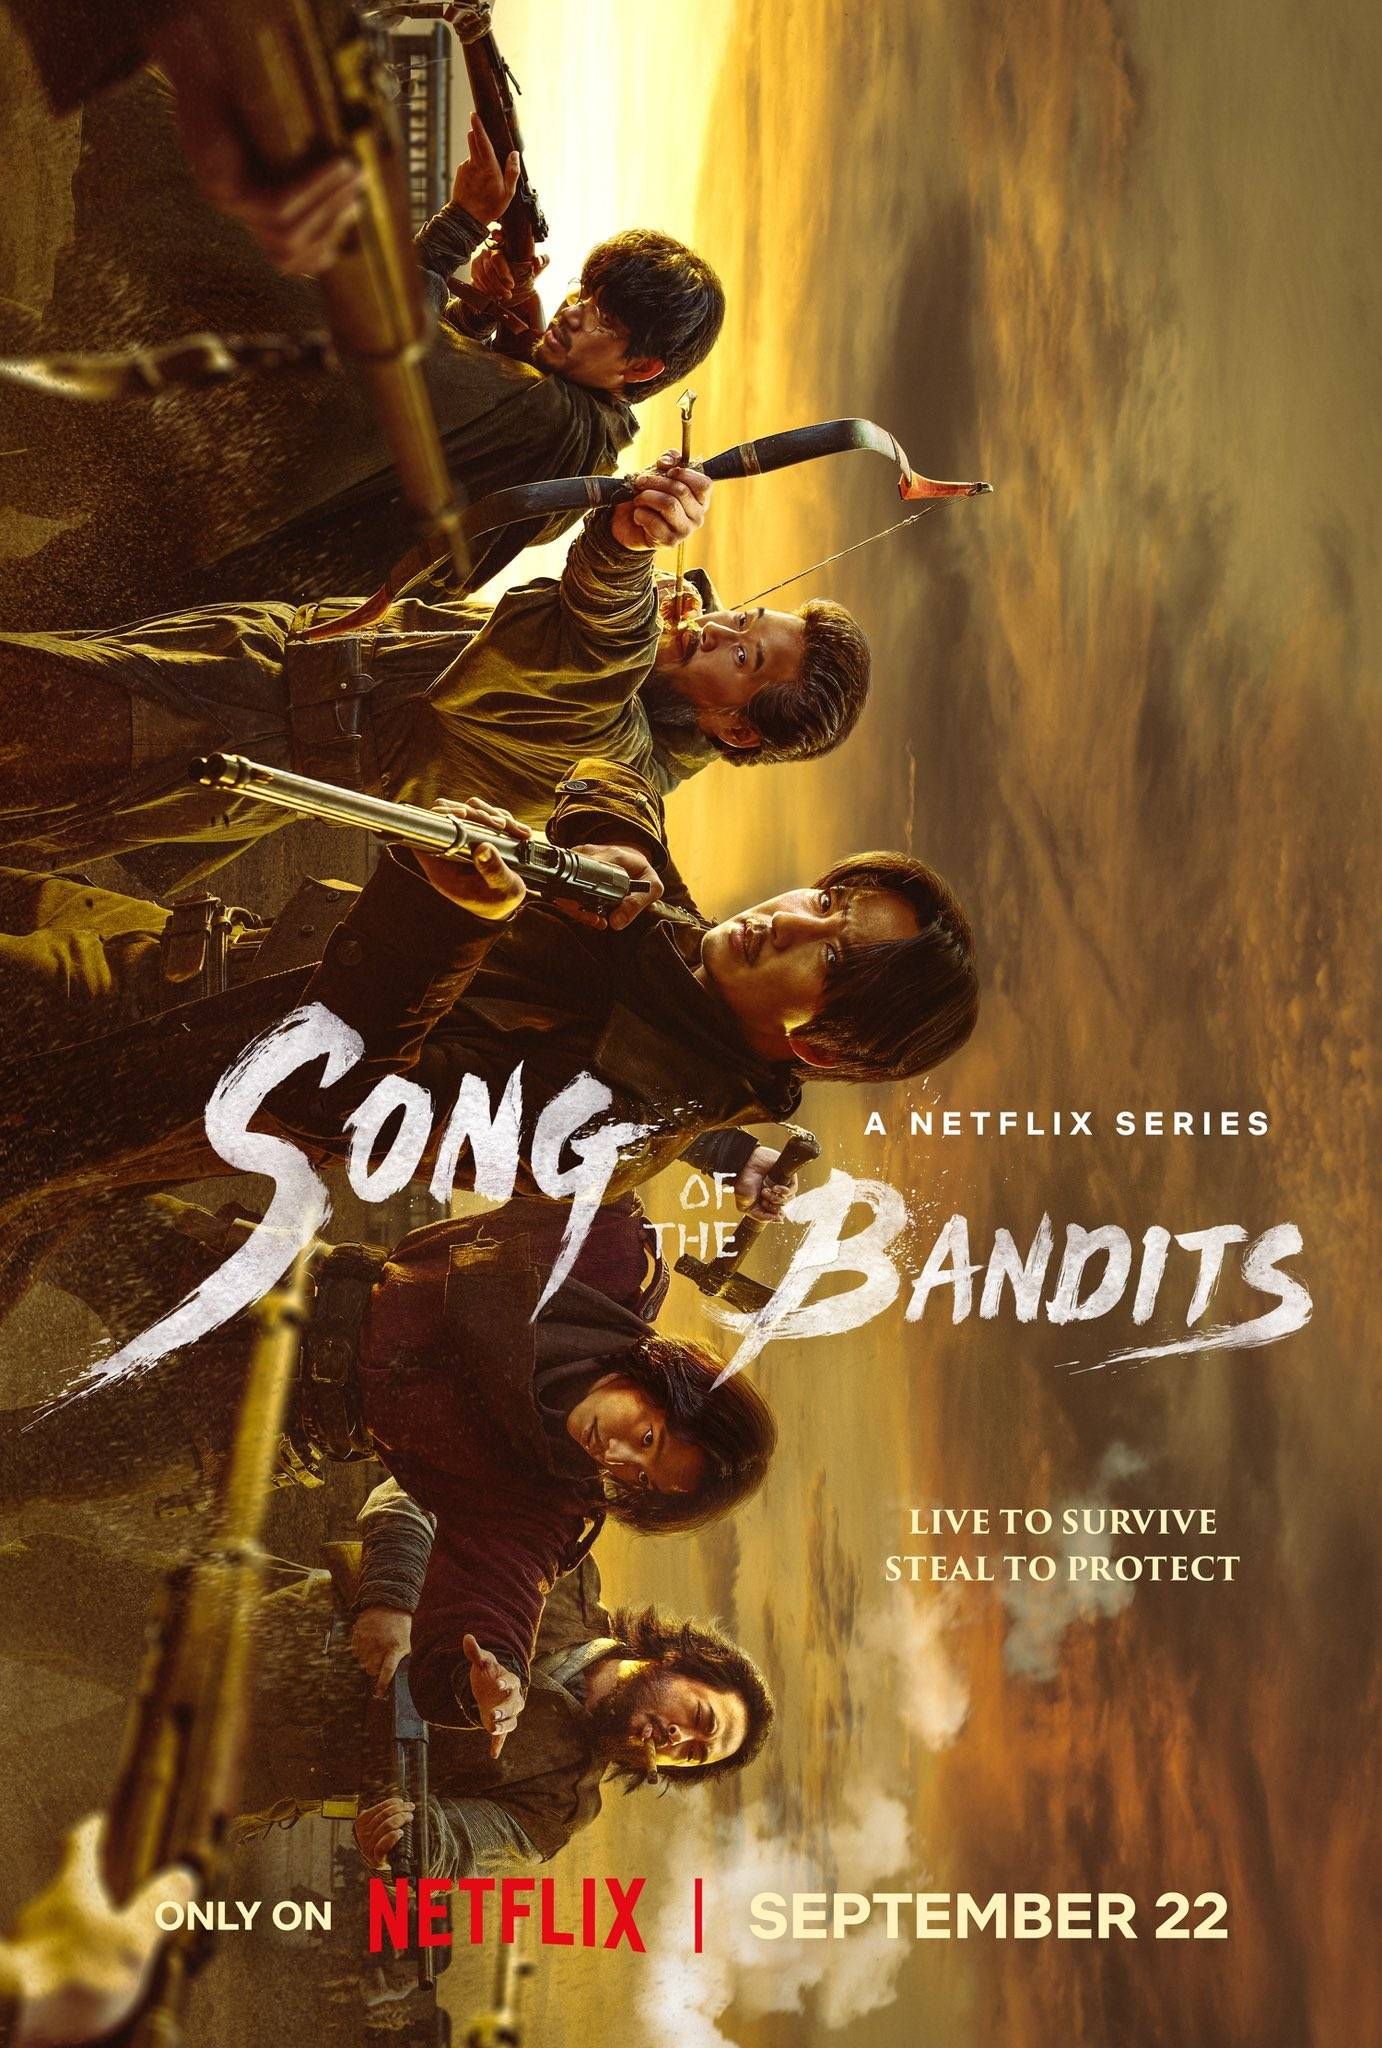 Song of the Bandits Netflix Poster